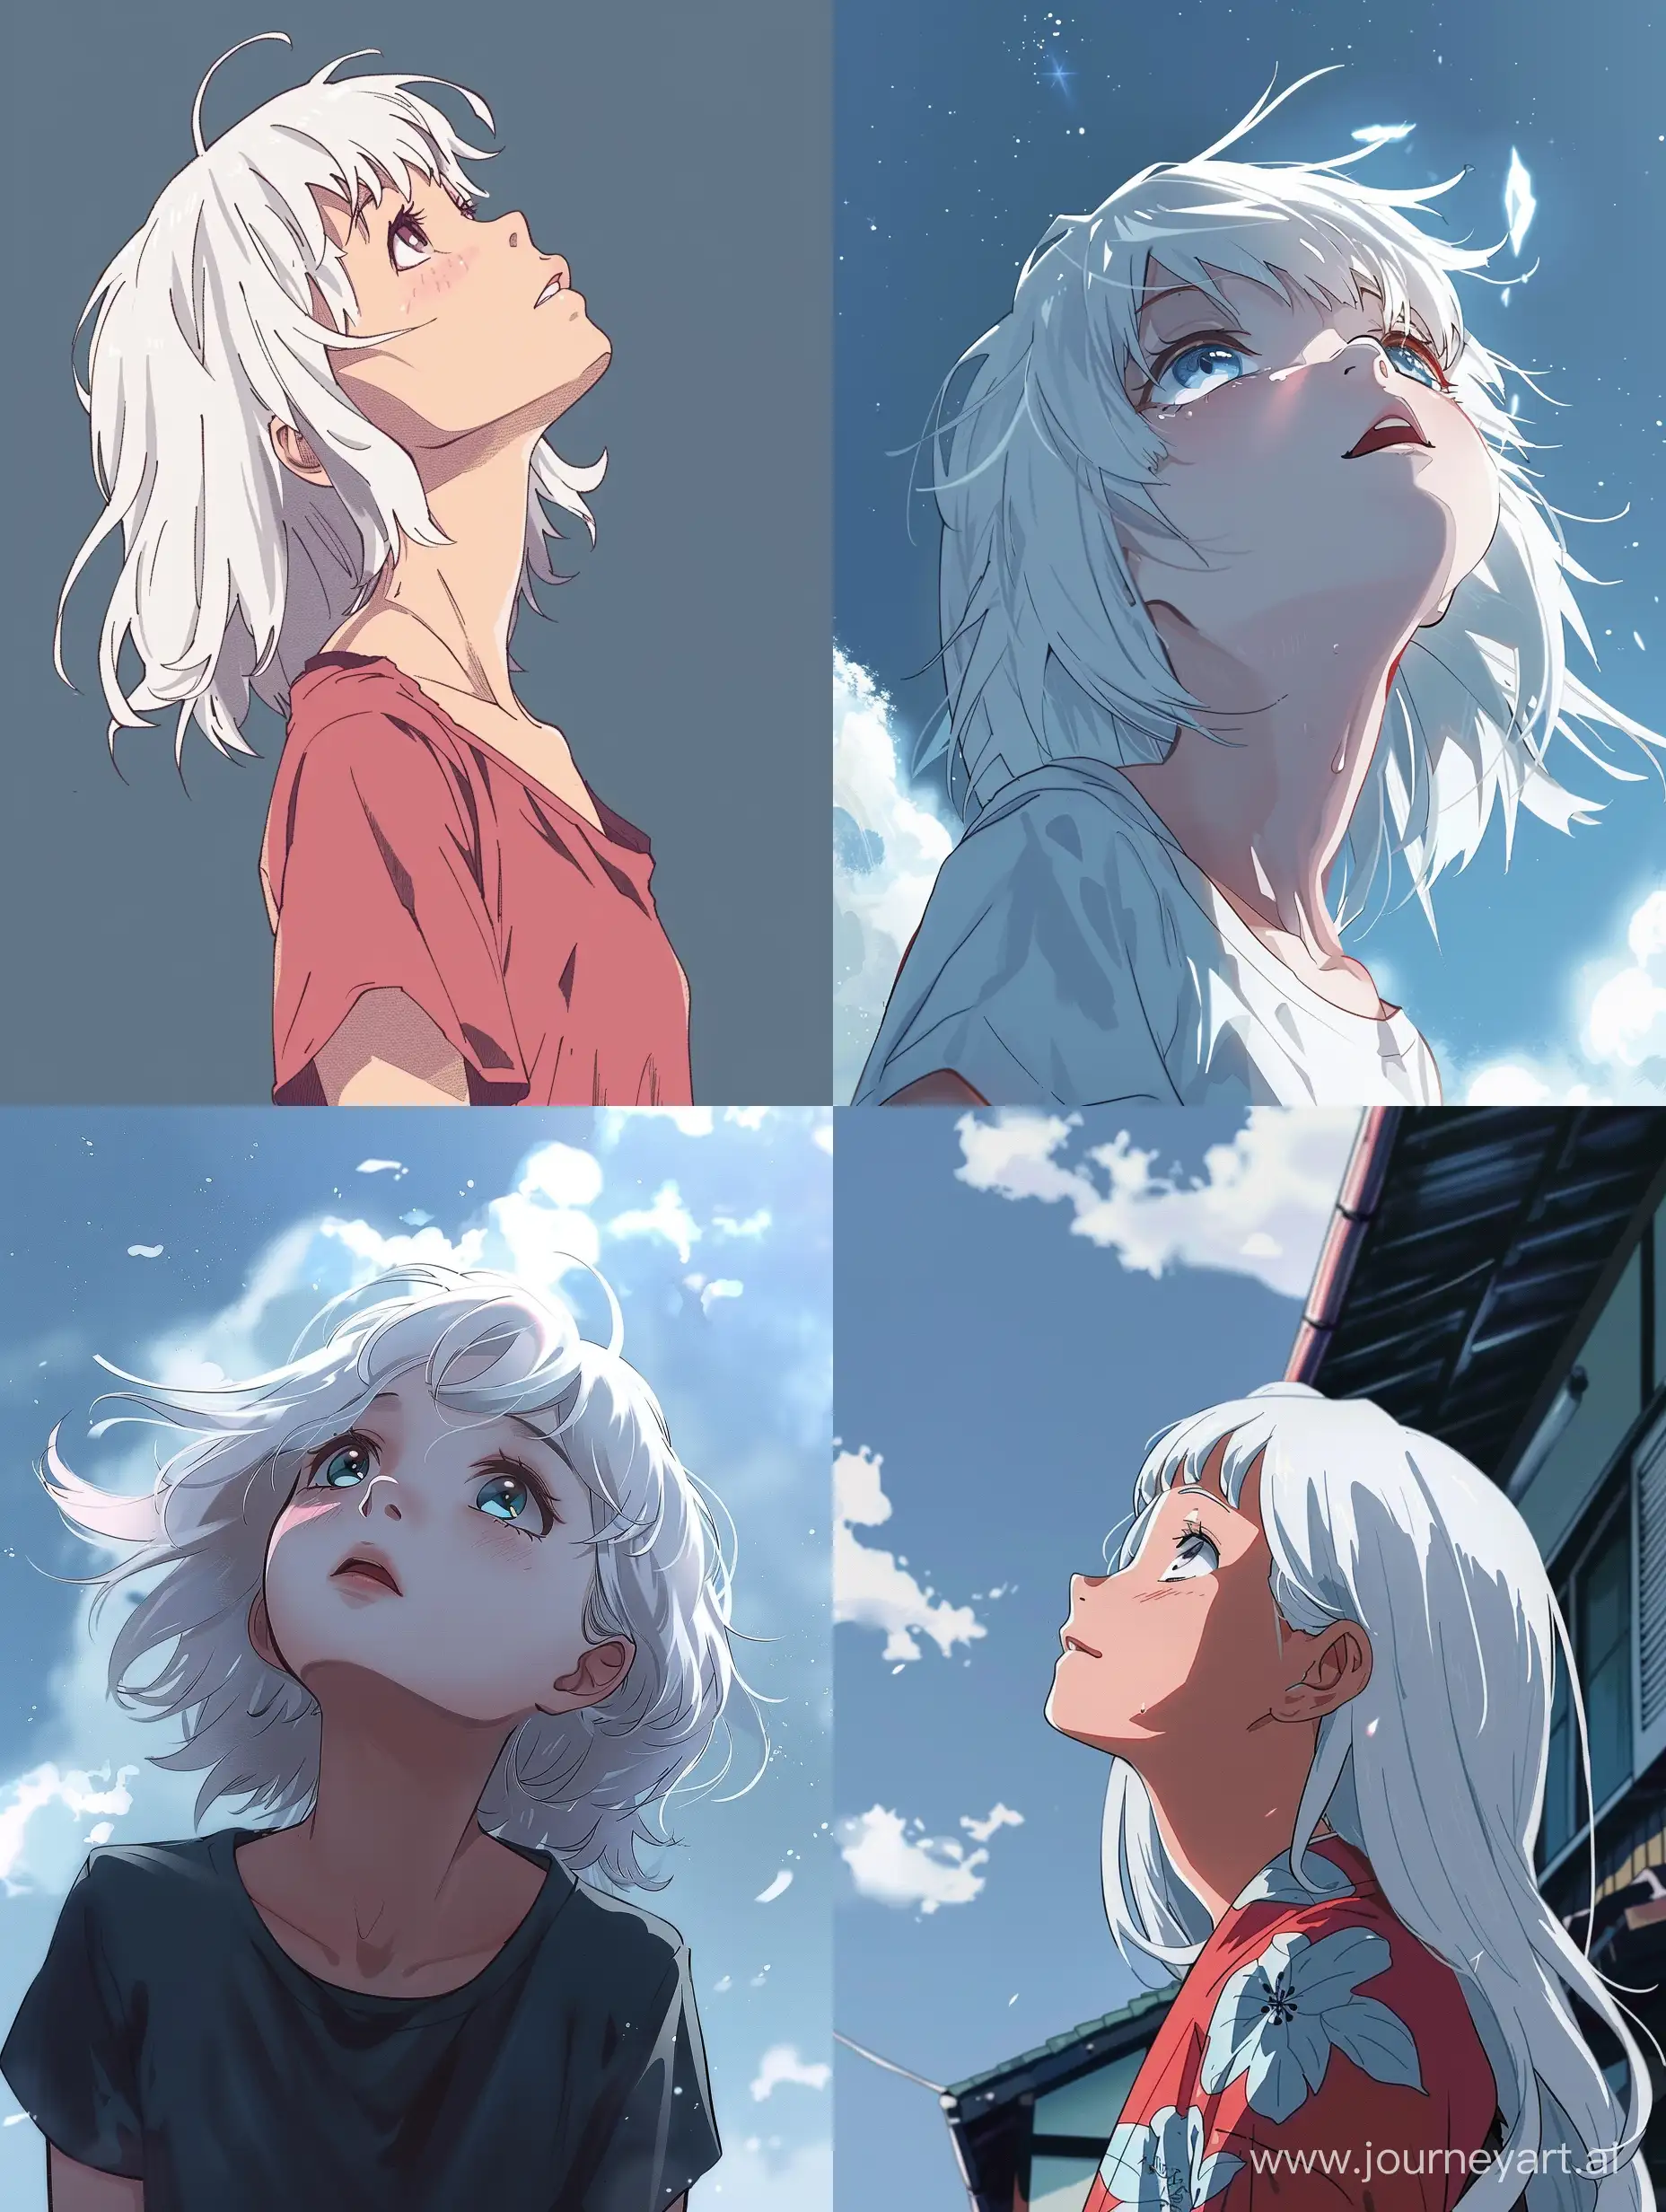 Adorable-Anime-Girl-with-White-Hair-Gazing-at-the-Sky